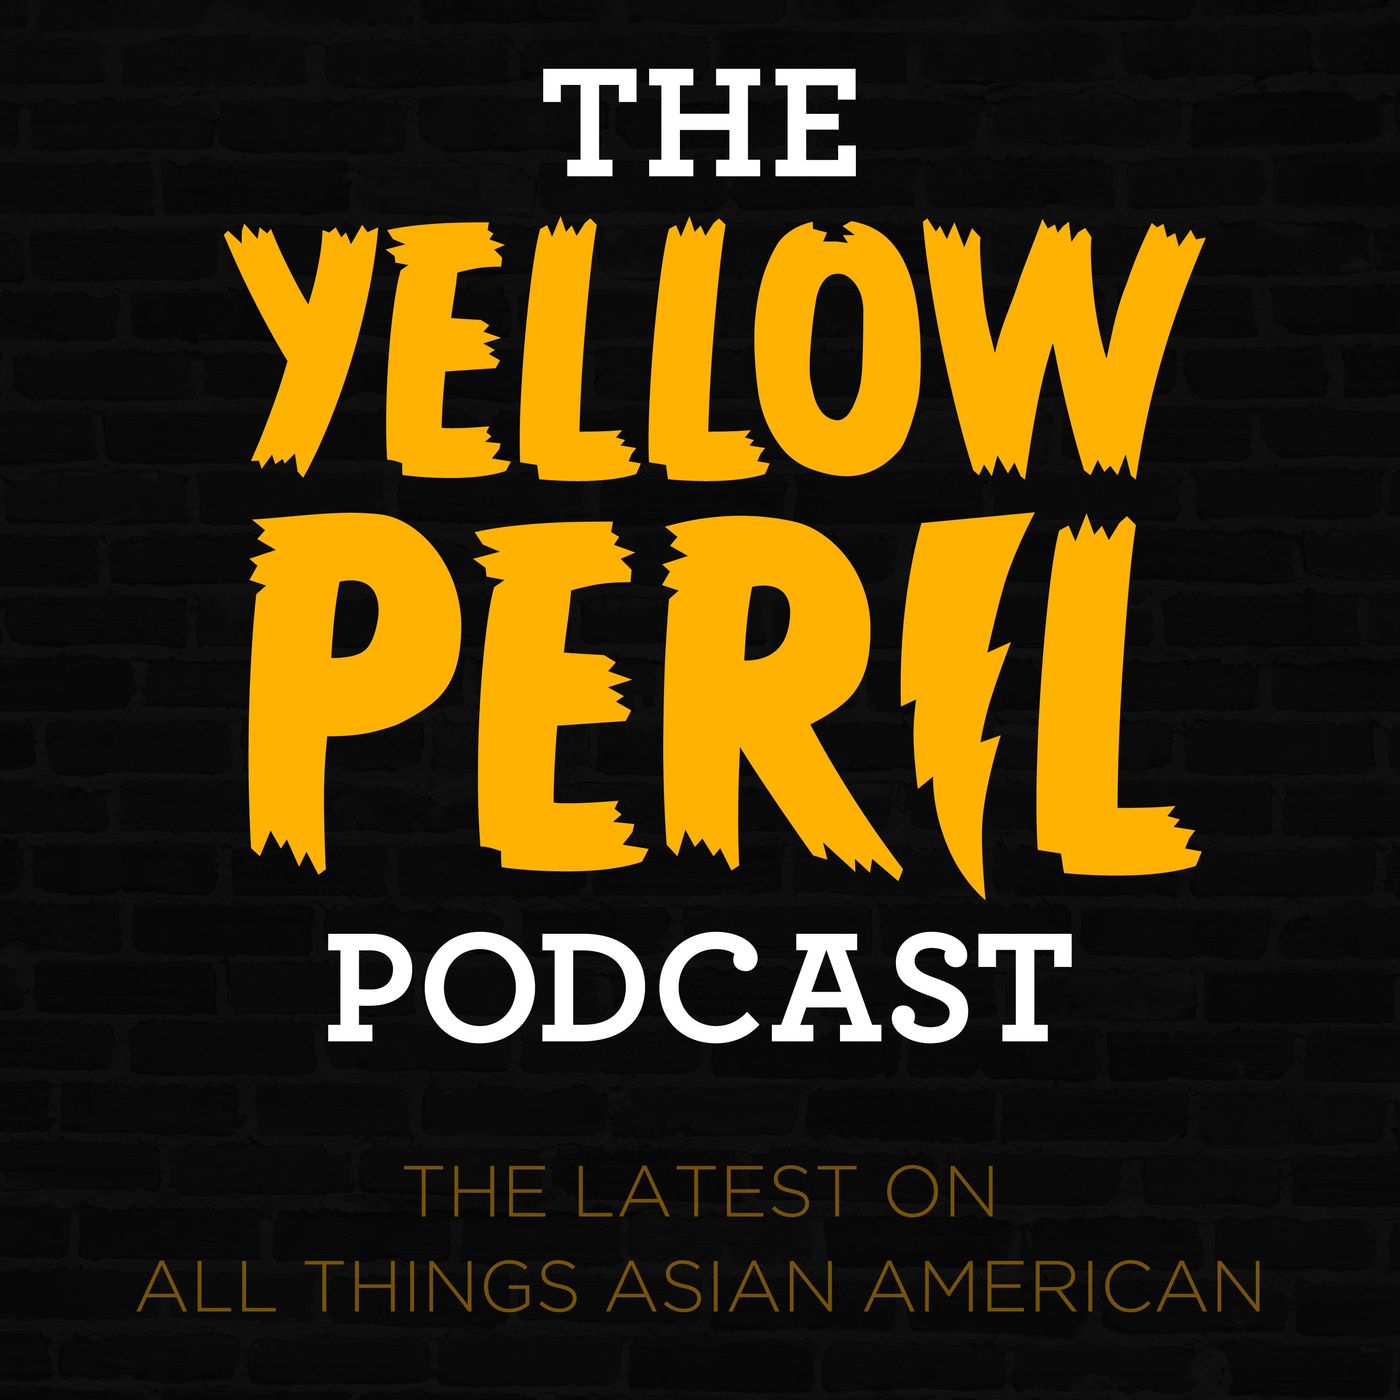 The Yellow Peril Podcast